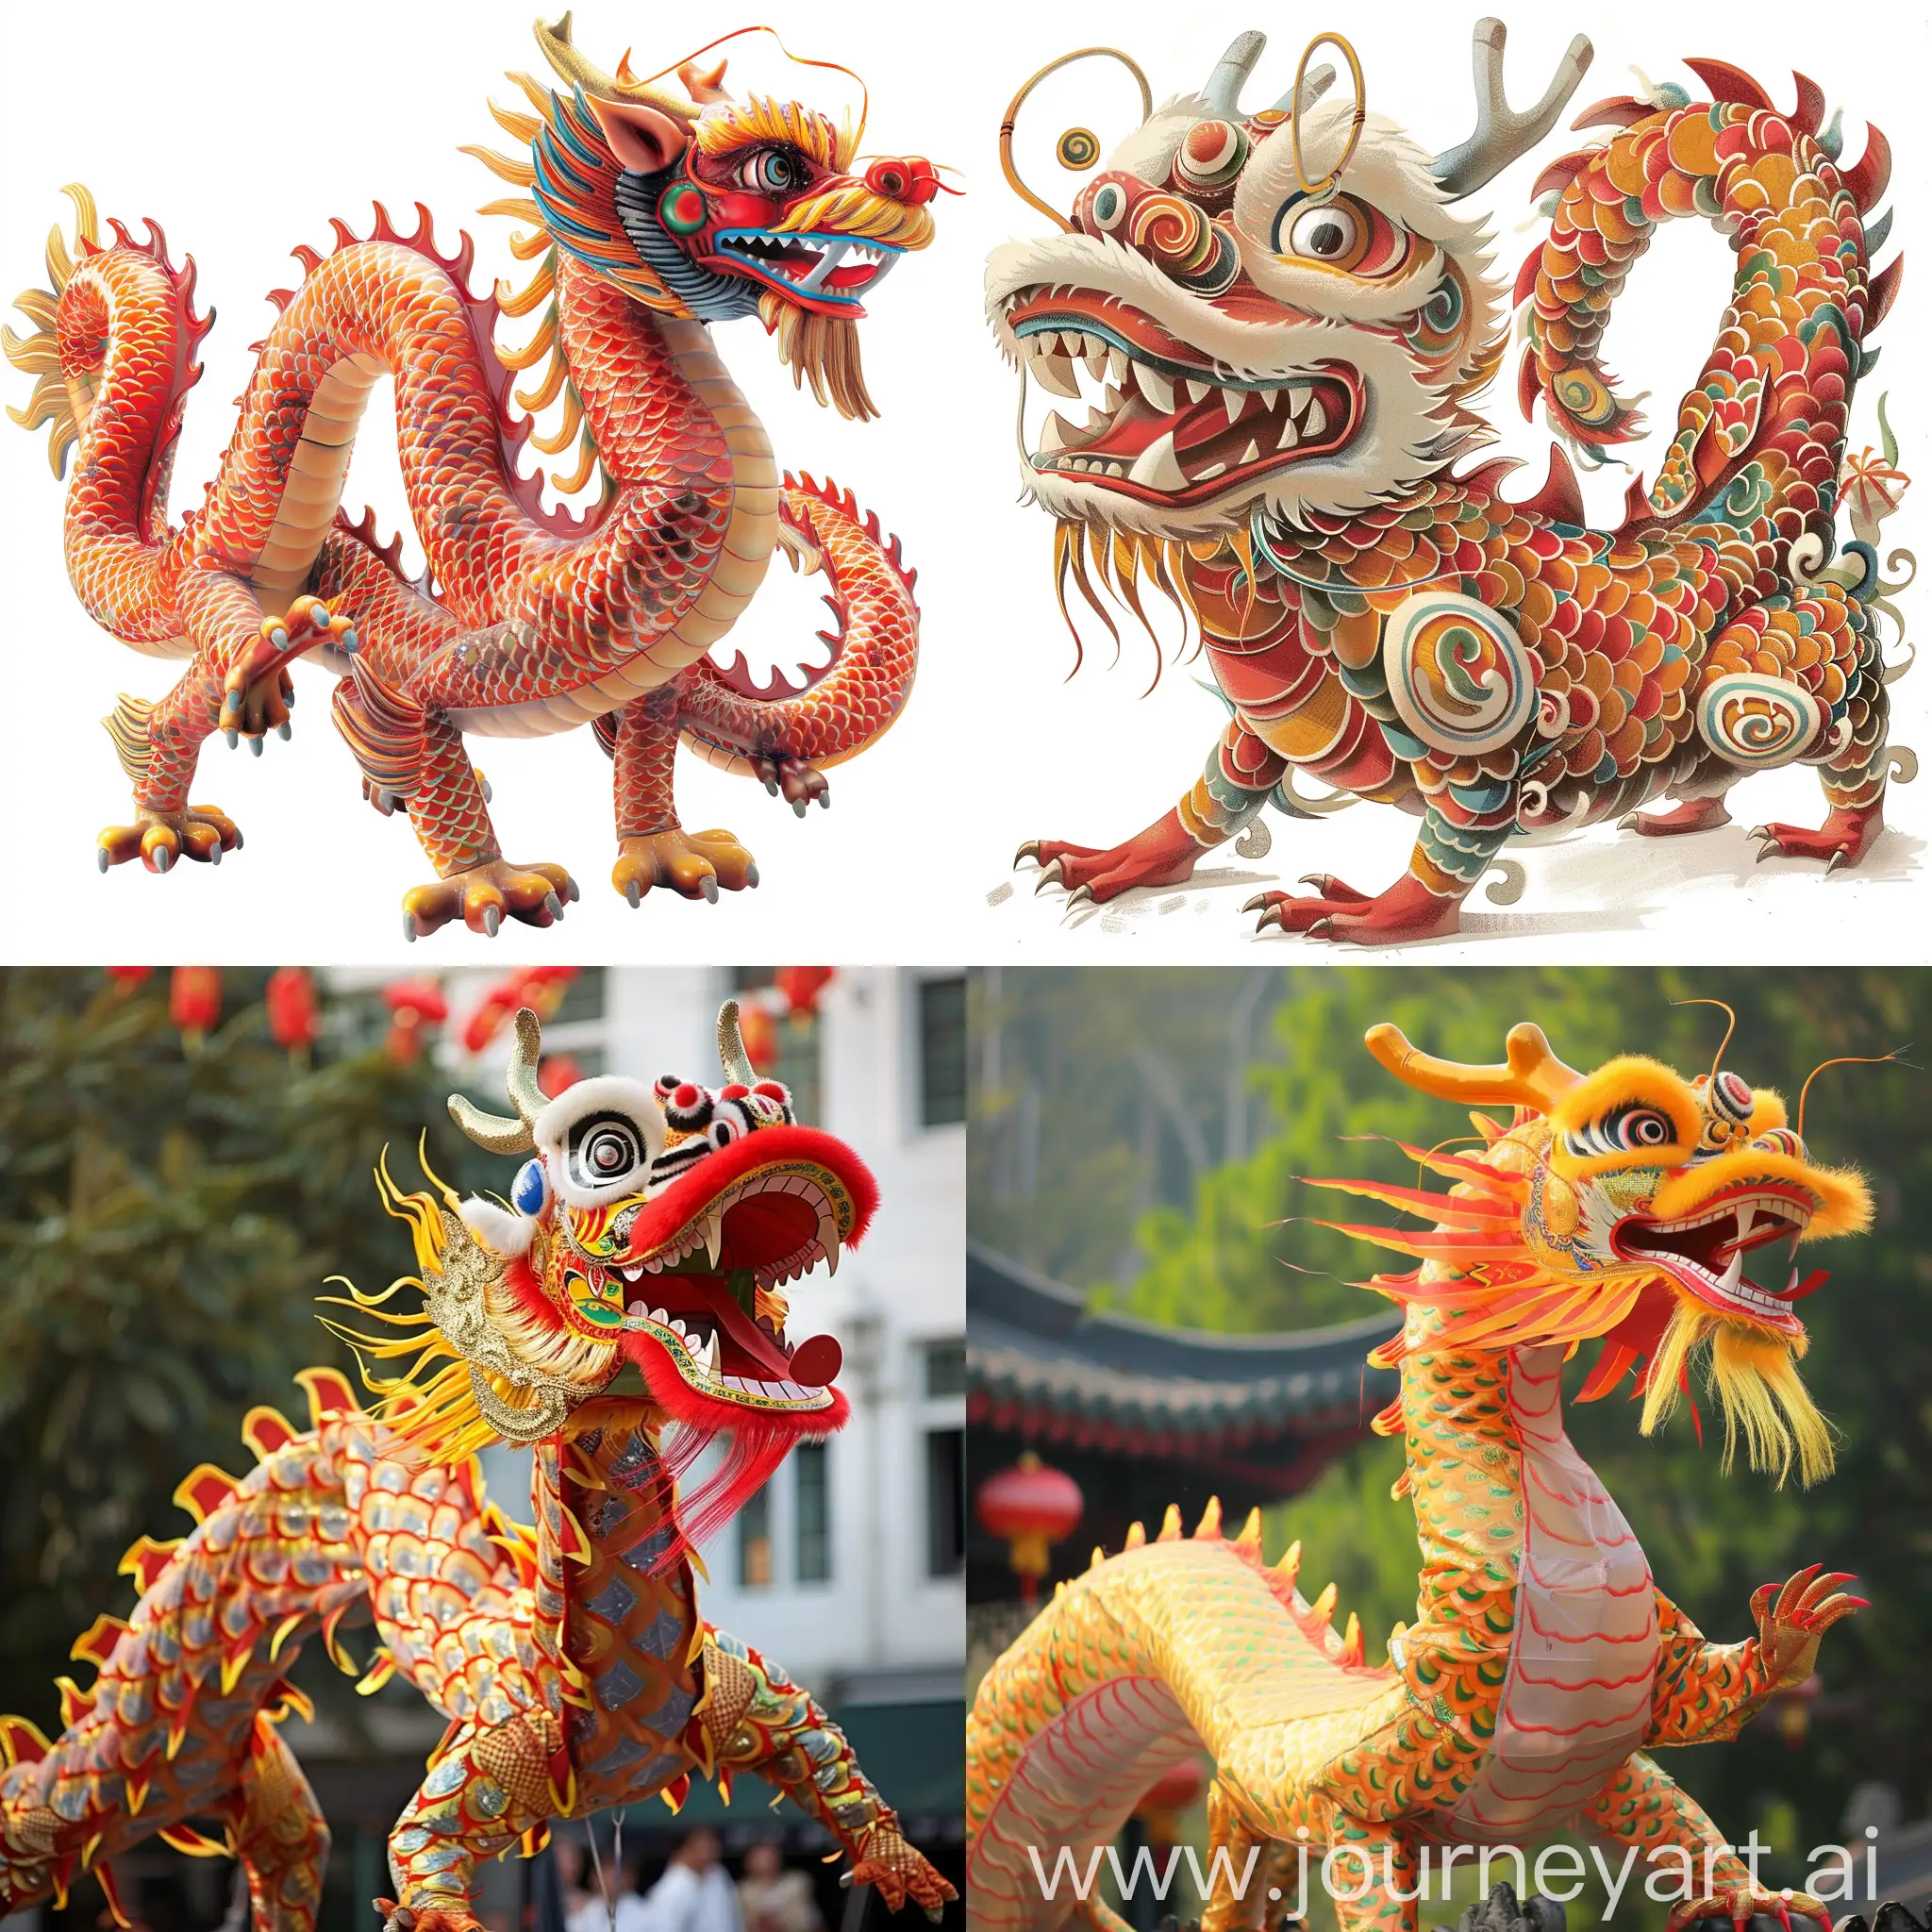 The festive Chinese dragon is similar to the one used by the royal family but in a less serious style.